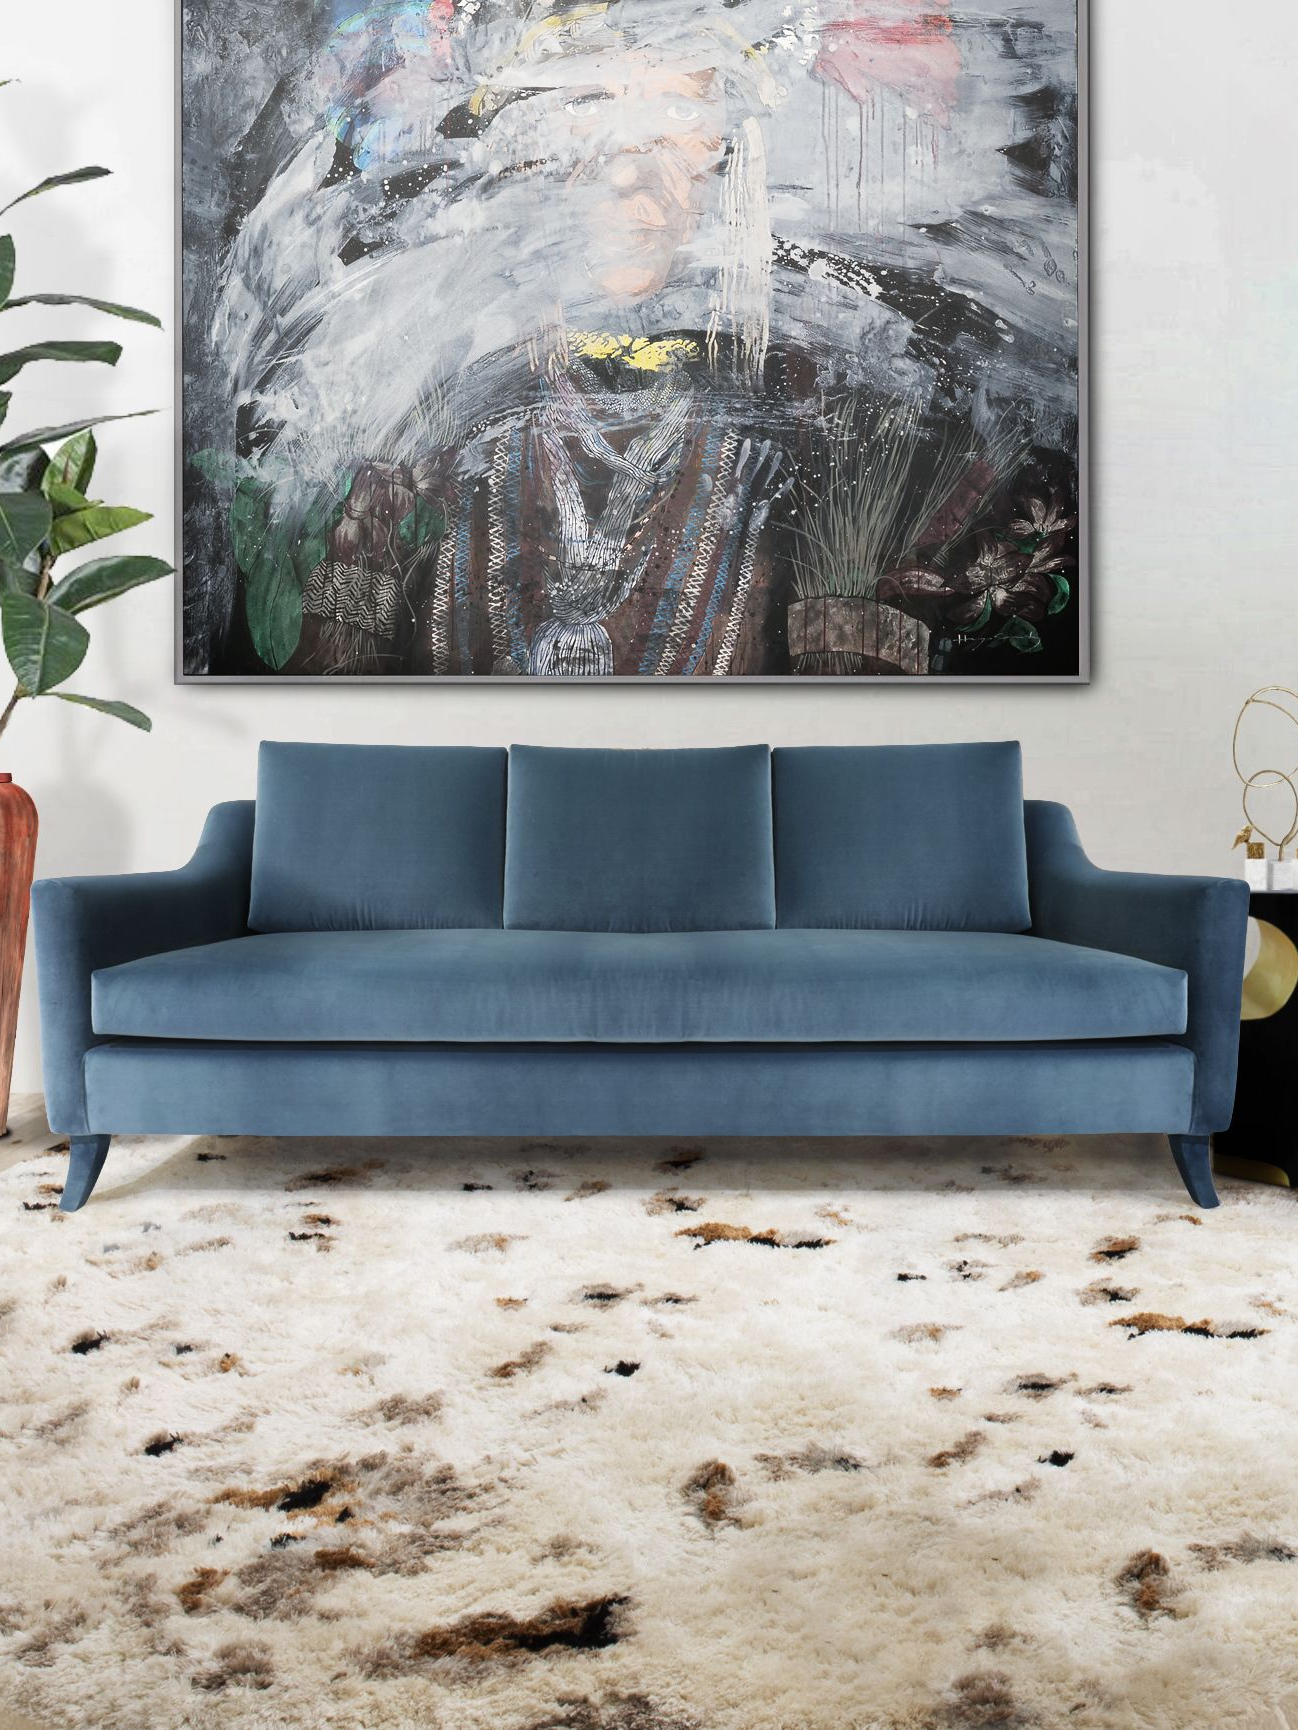 The Comfort of Oslo Rug Design In A Simple Living Room by Rug'Society